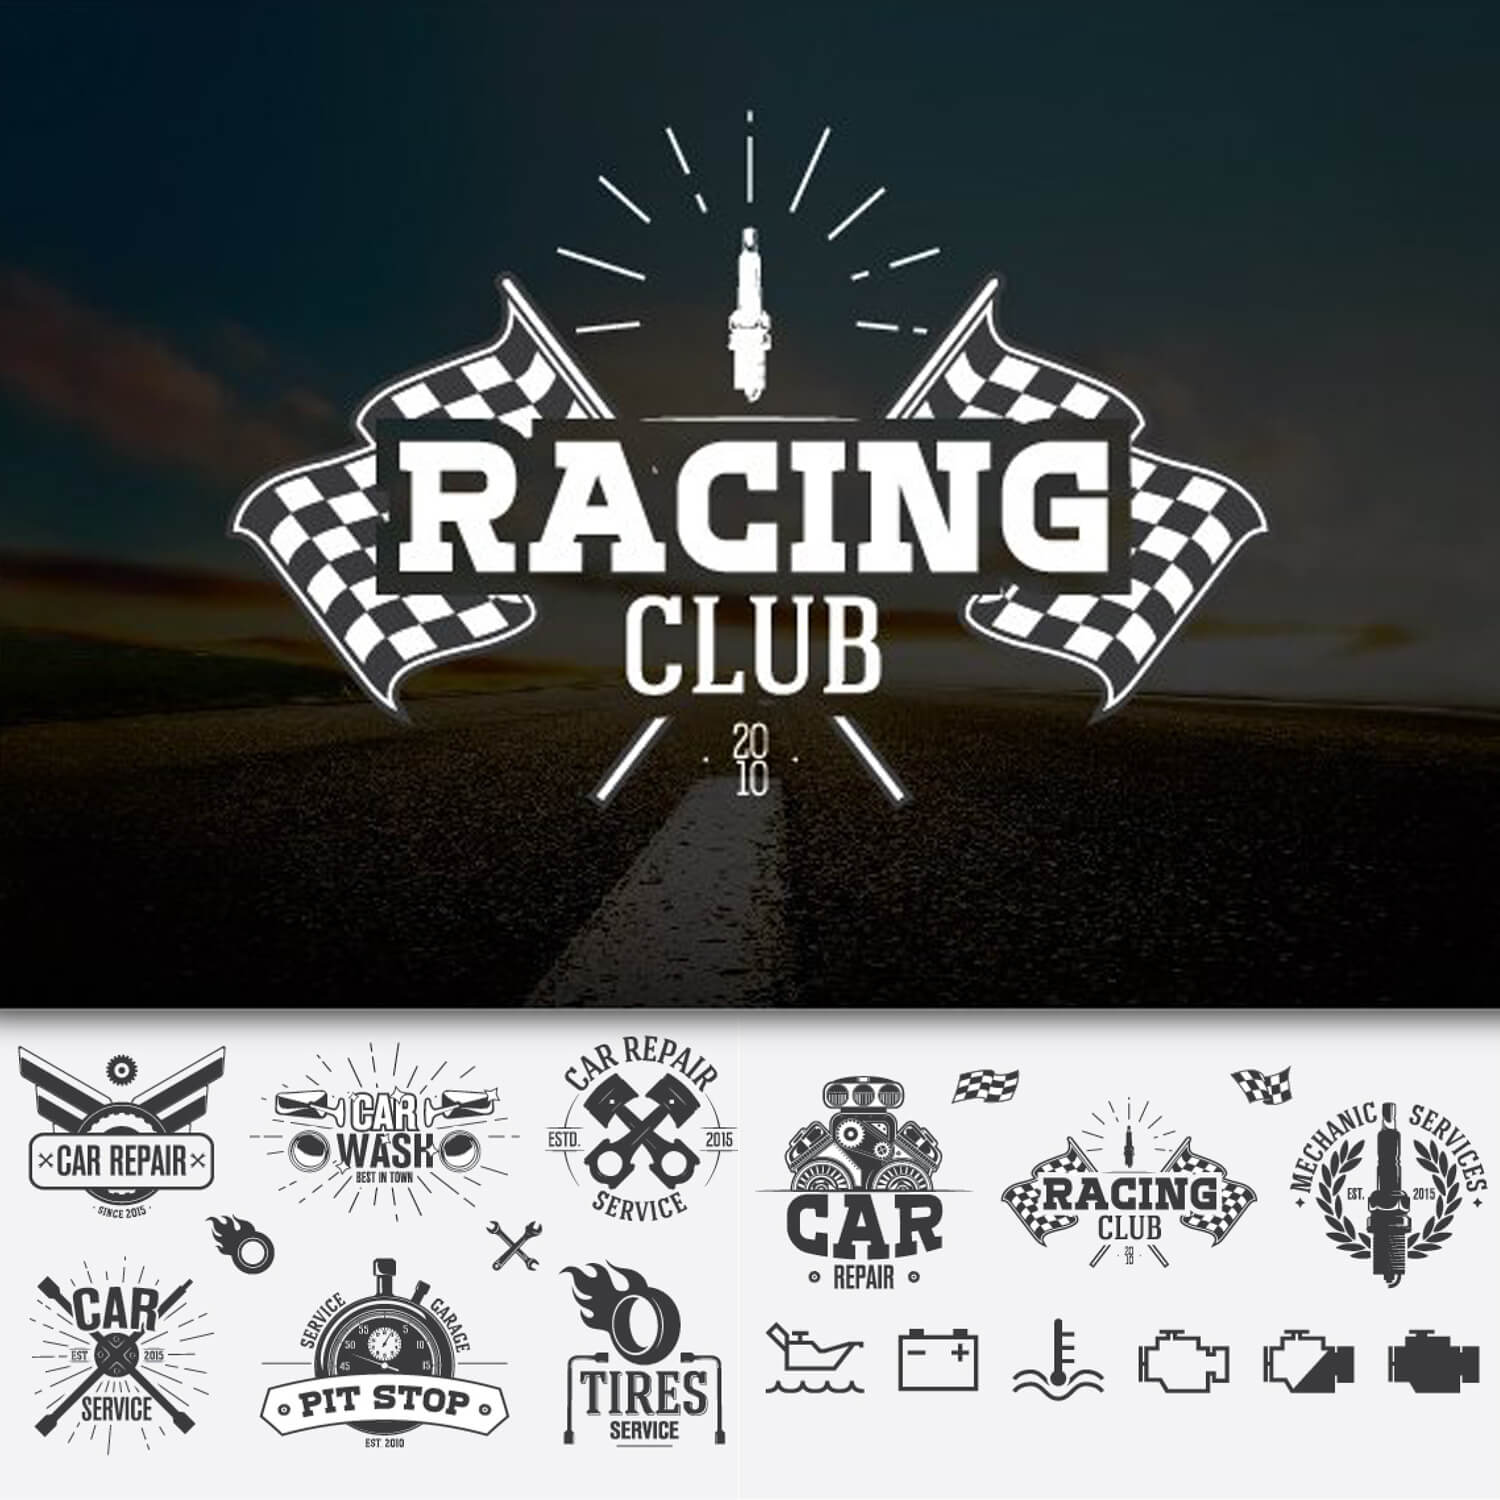 Large "Racing Club" logo and 15 small car service labels and logos on white background.